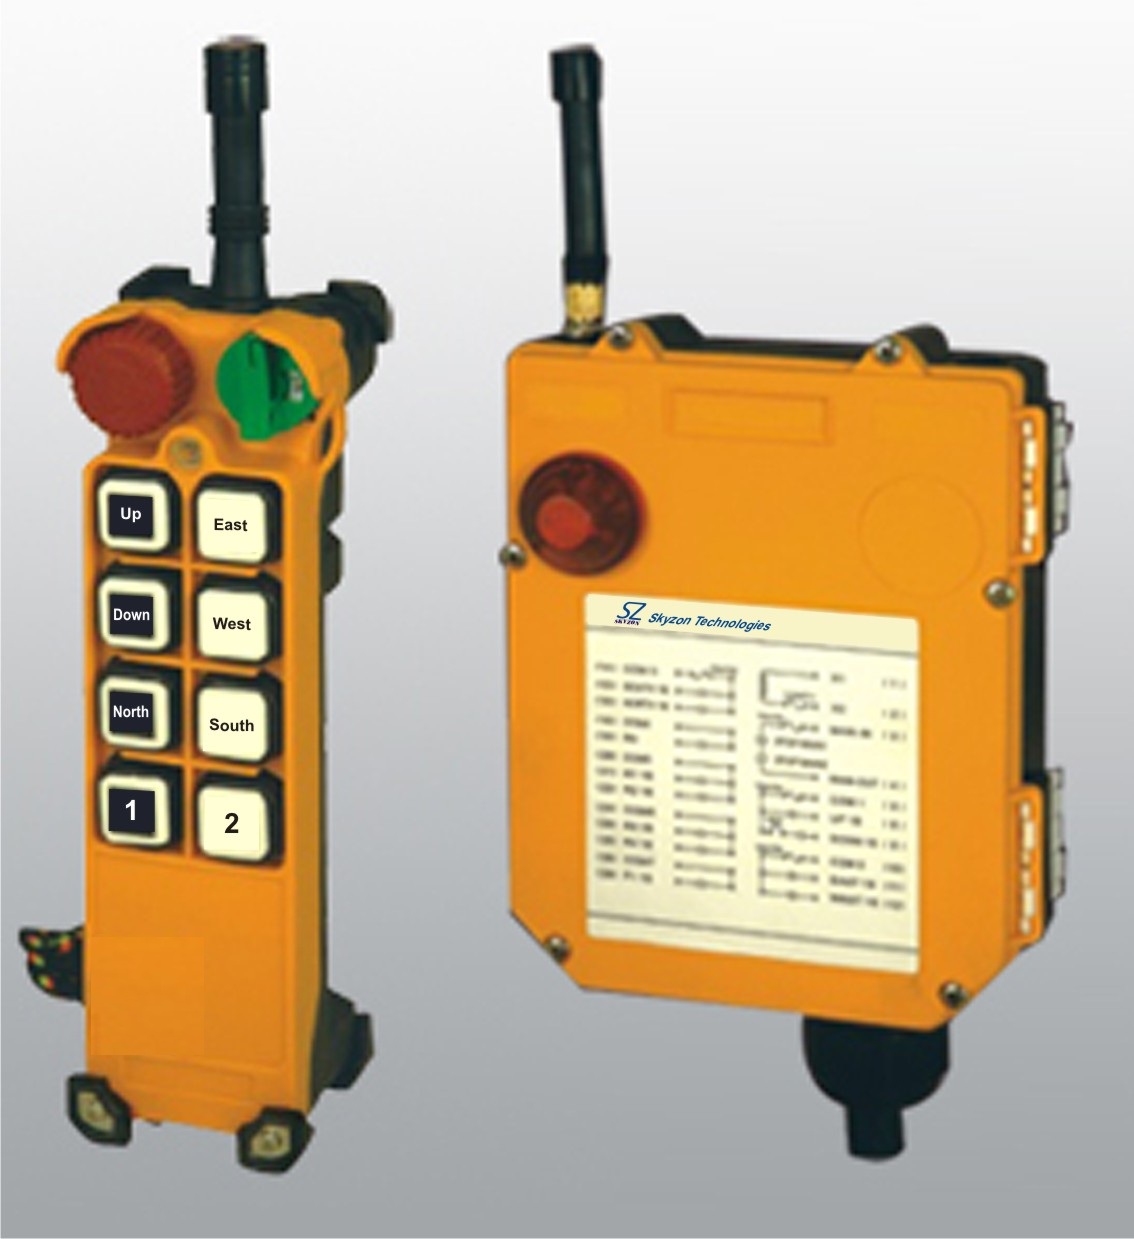 Radio Remote Control System for Eot Cranes